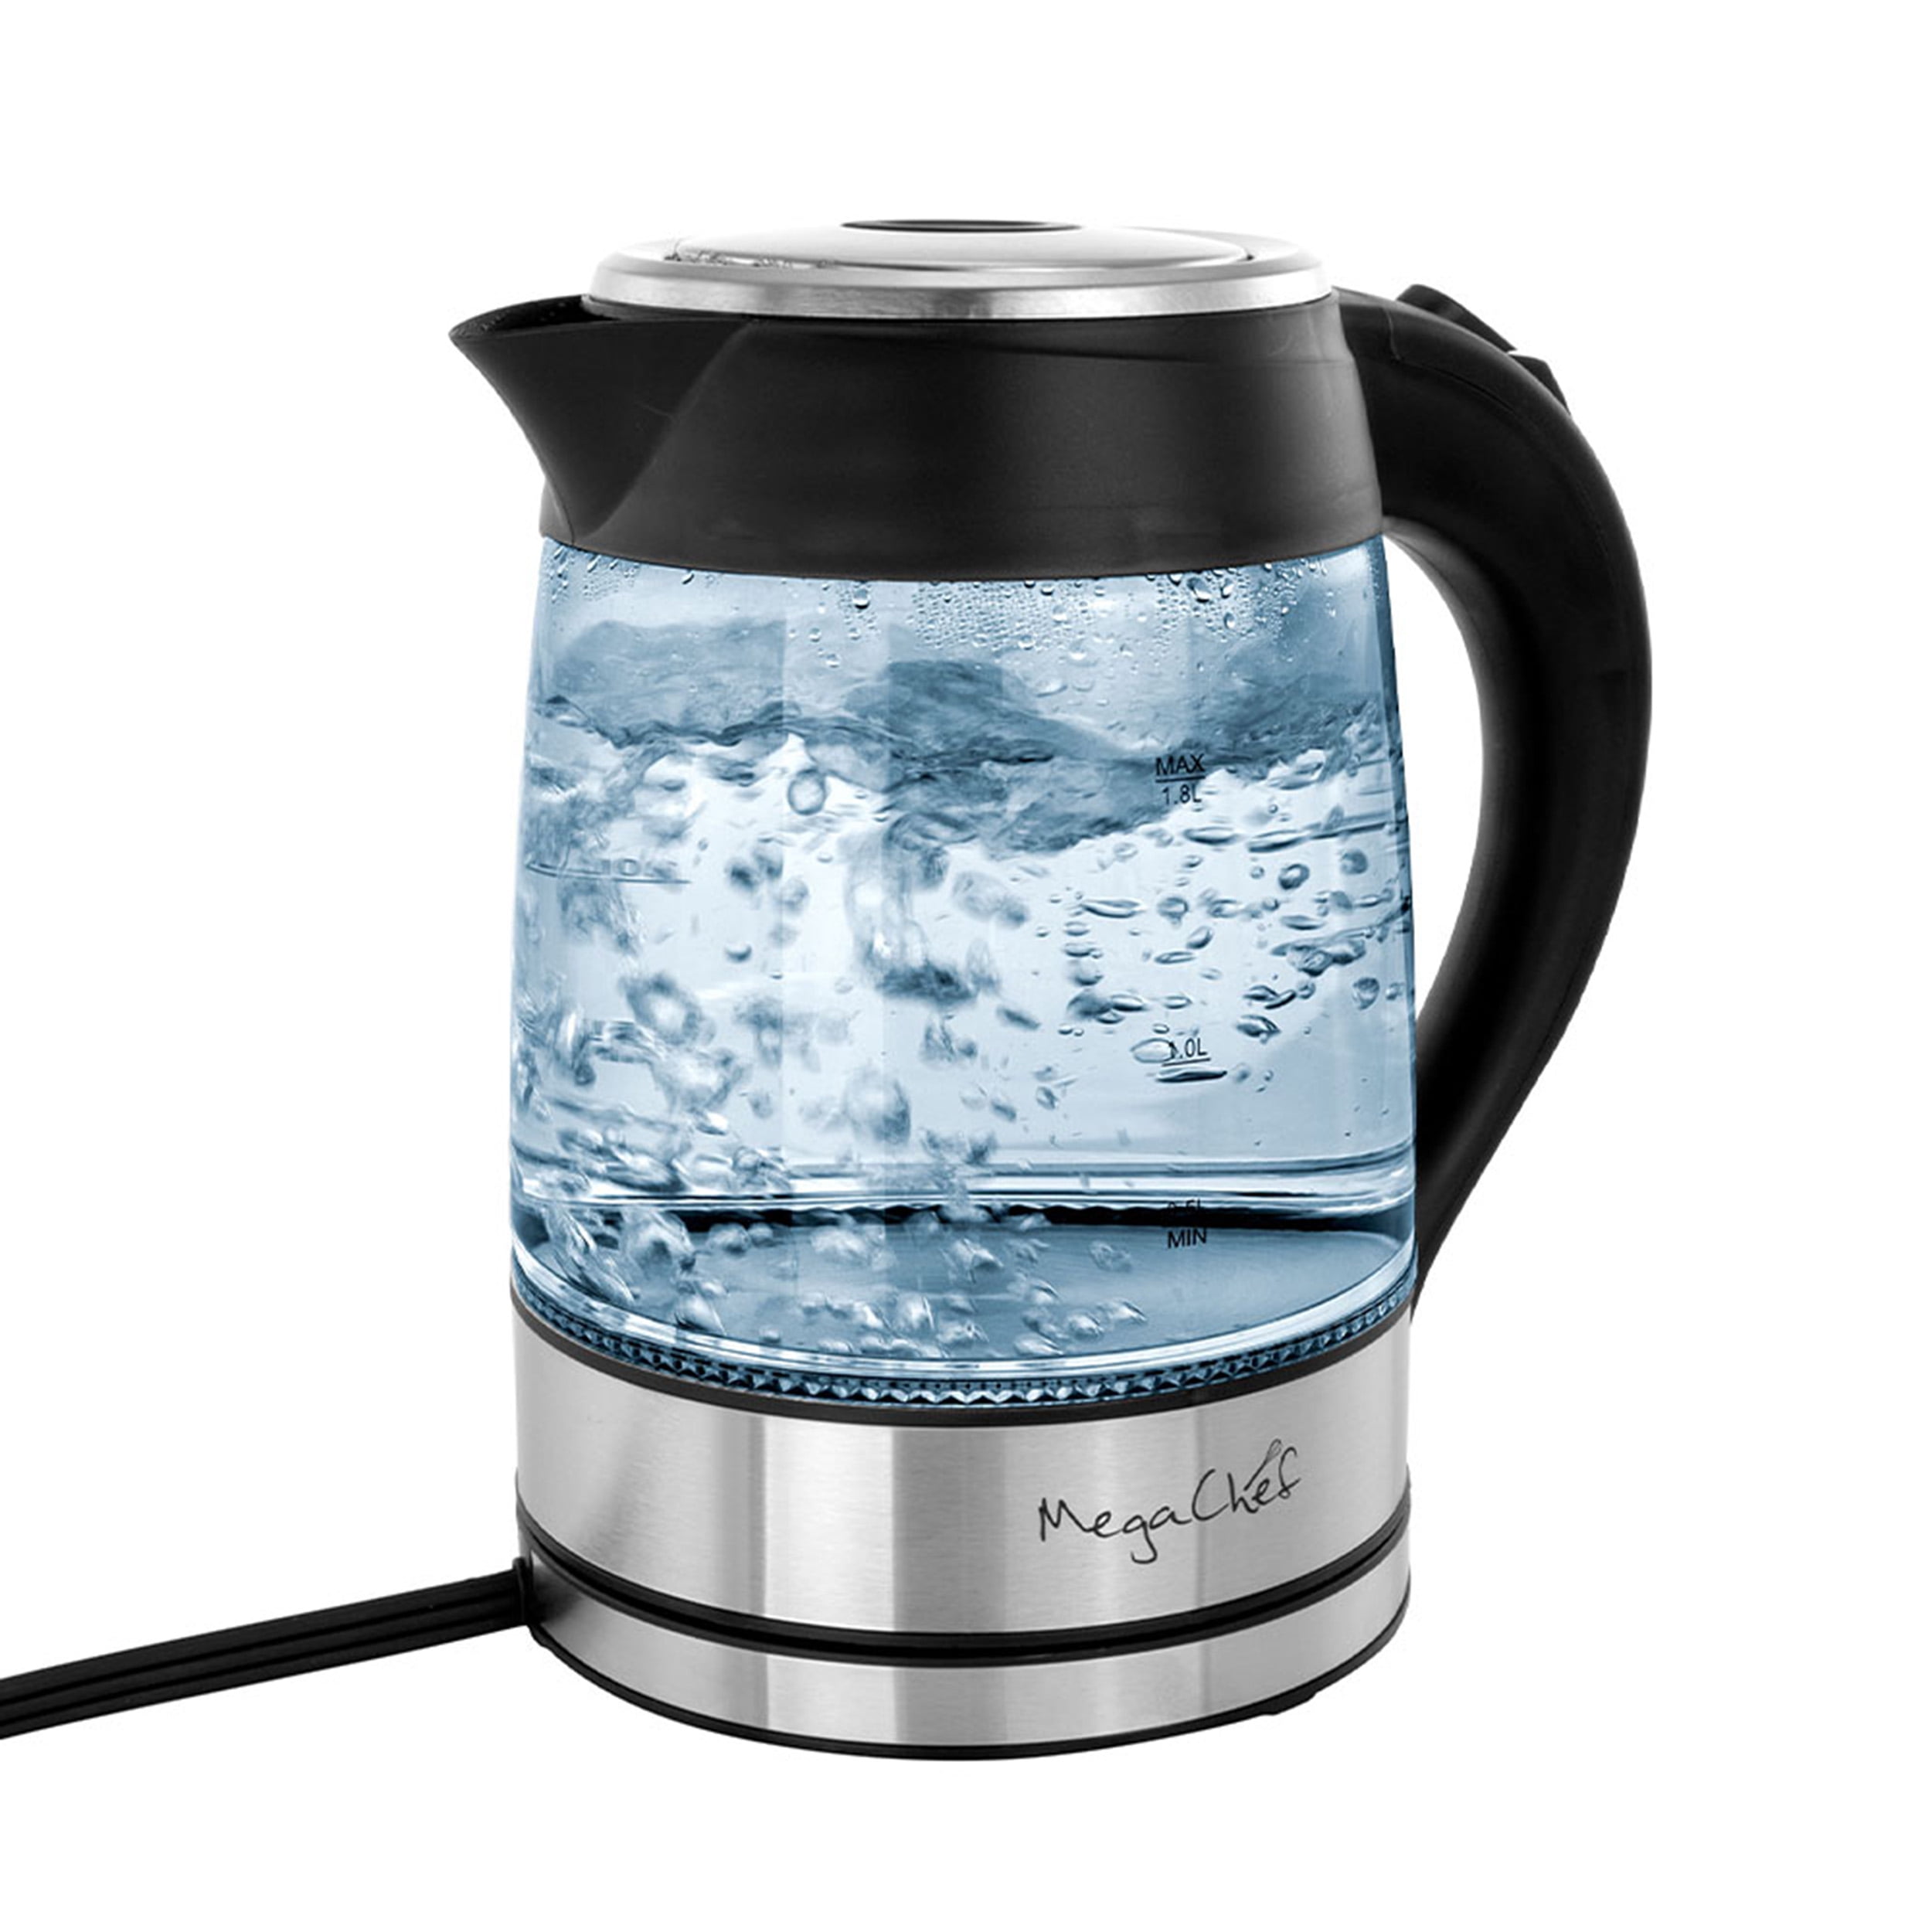 Megachef 1 8lt Glass And Stainless Steel Electric Tea Kettle